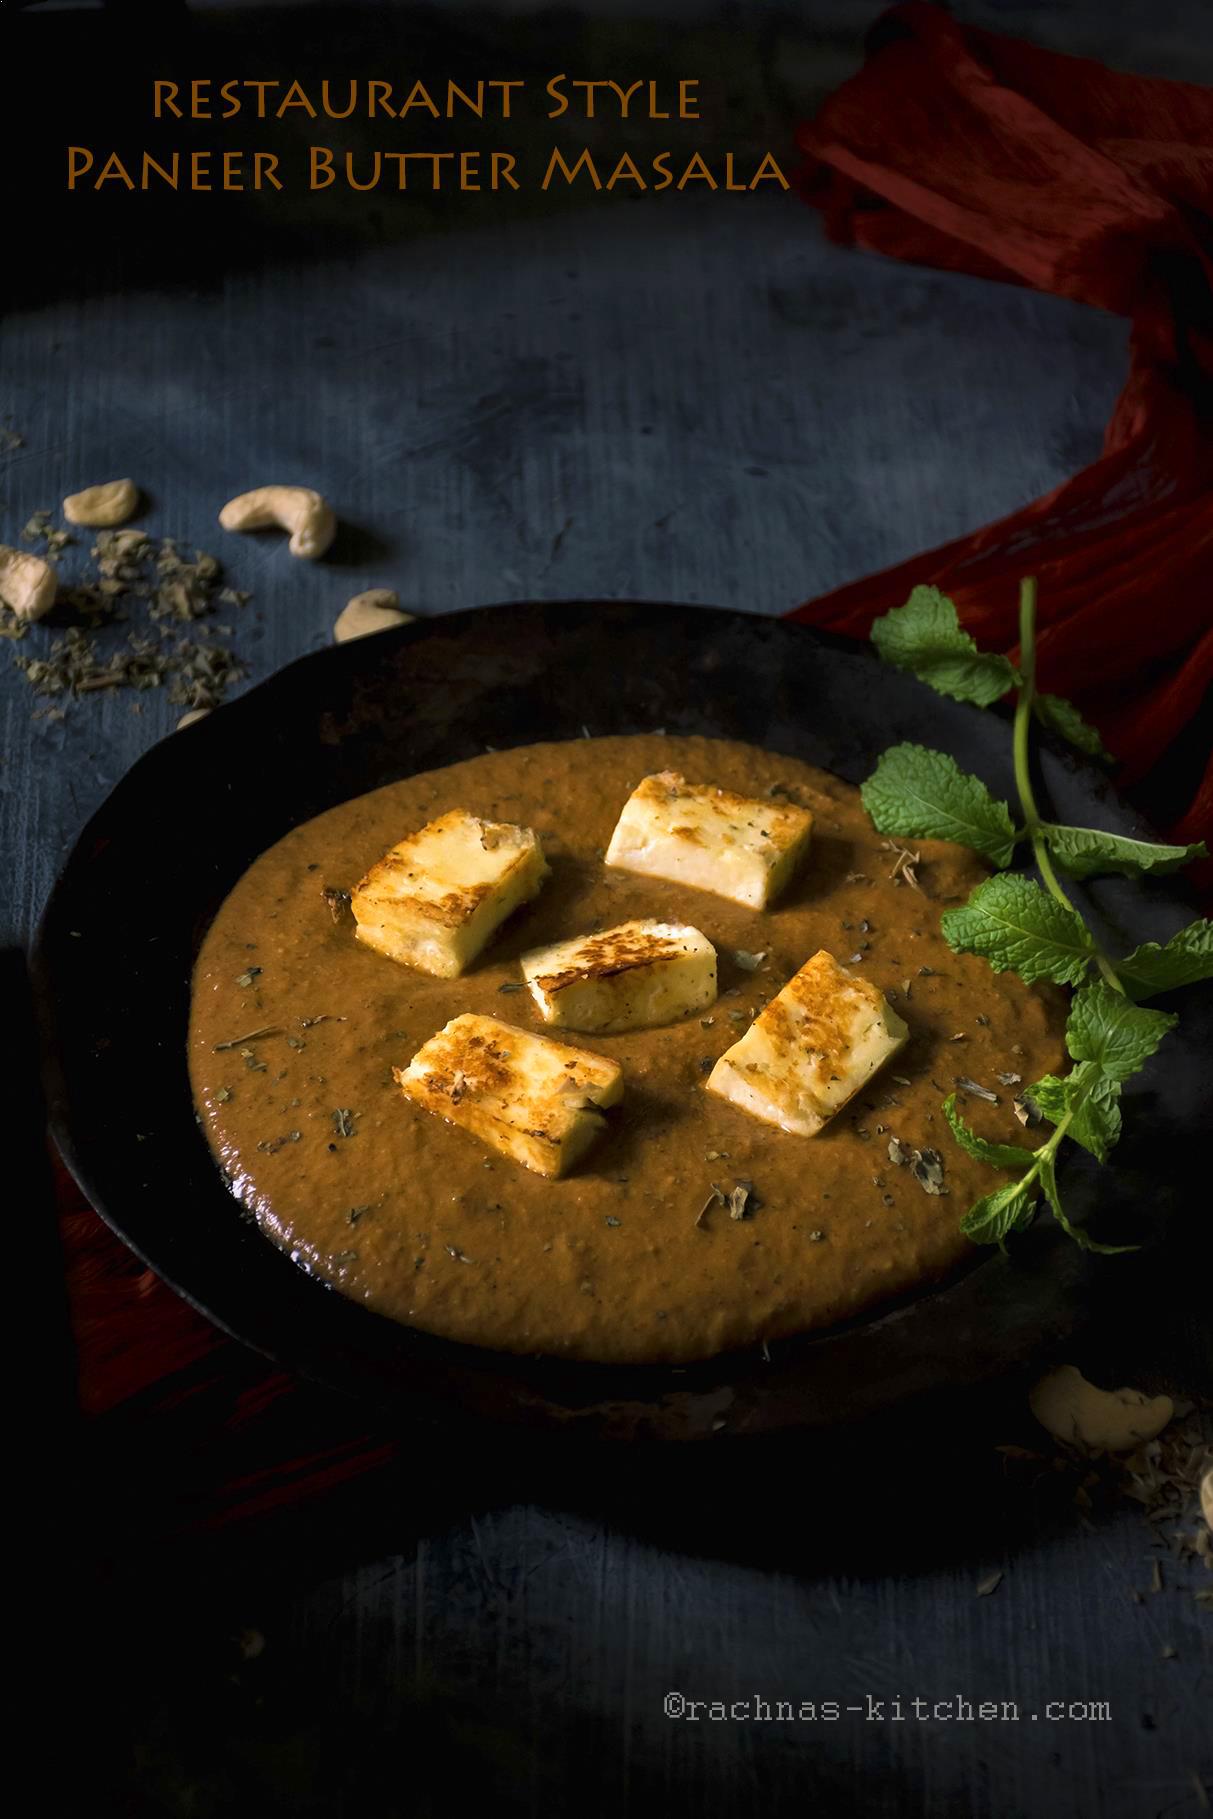 Authentic paneer butter masala